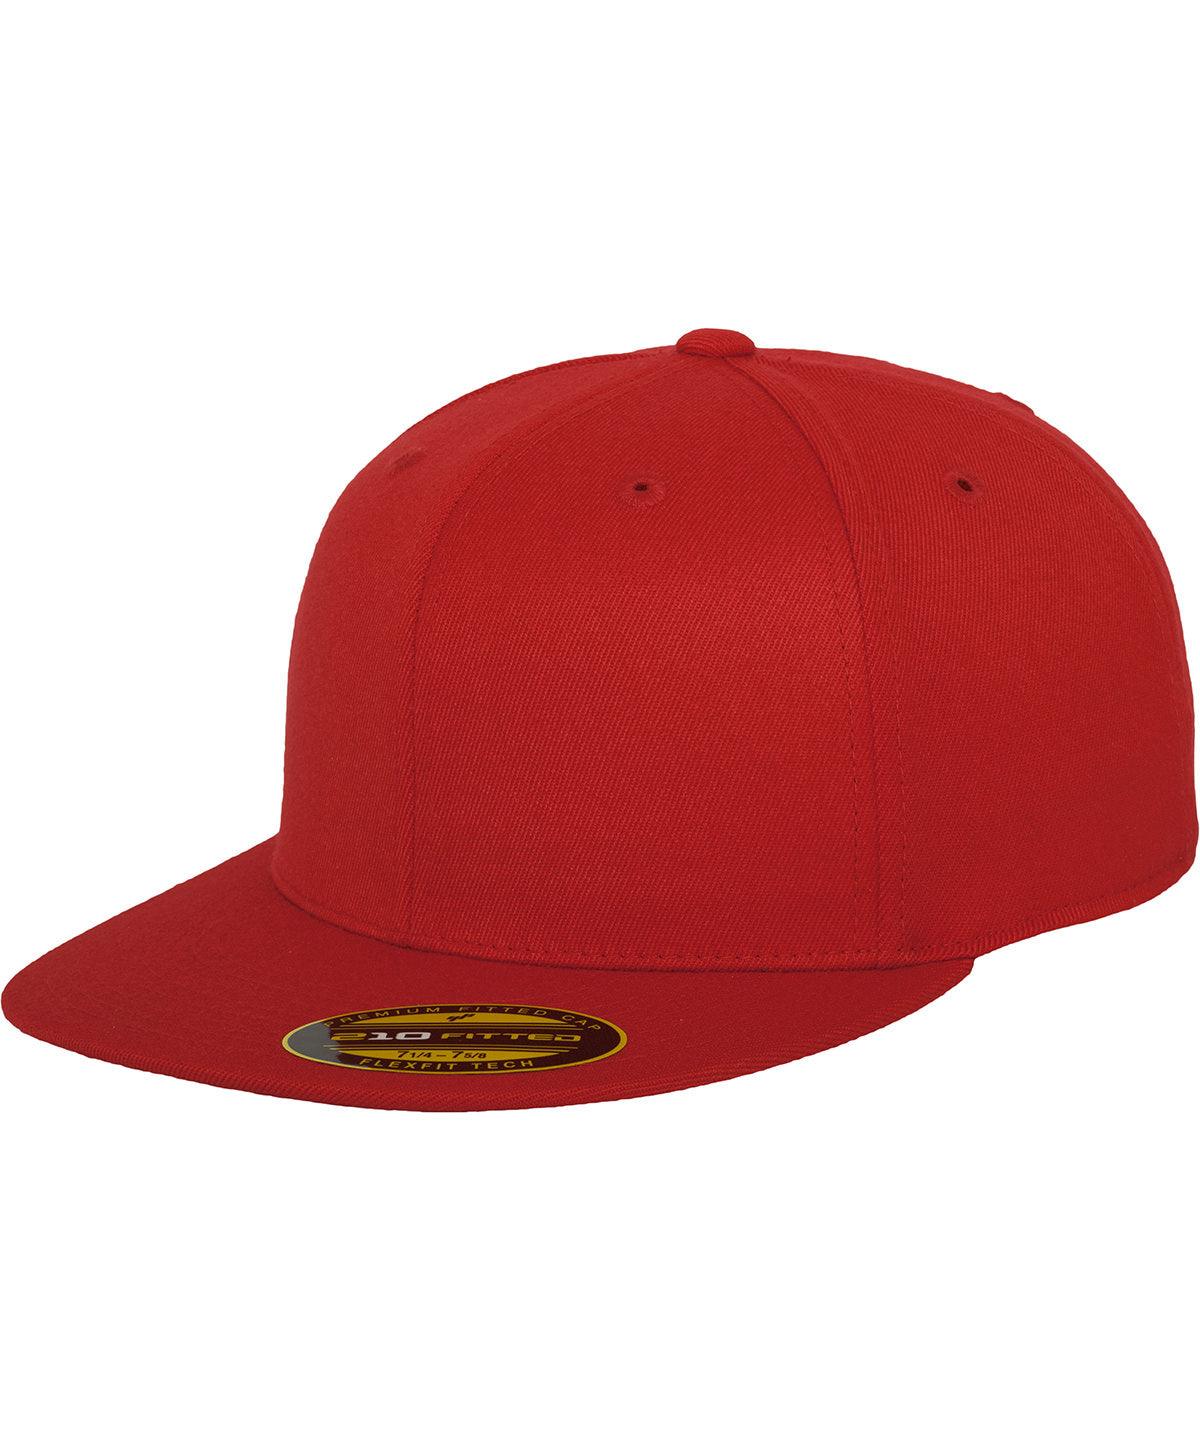 Red - Premium 210 fitted cap (6210) Caps Flexfit by Yupoong Headwear, New Colours for 2023, Rebrandable, Sports & Leisure Schoolwear Centres